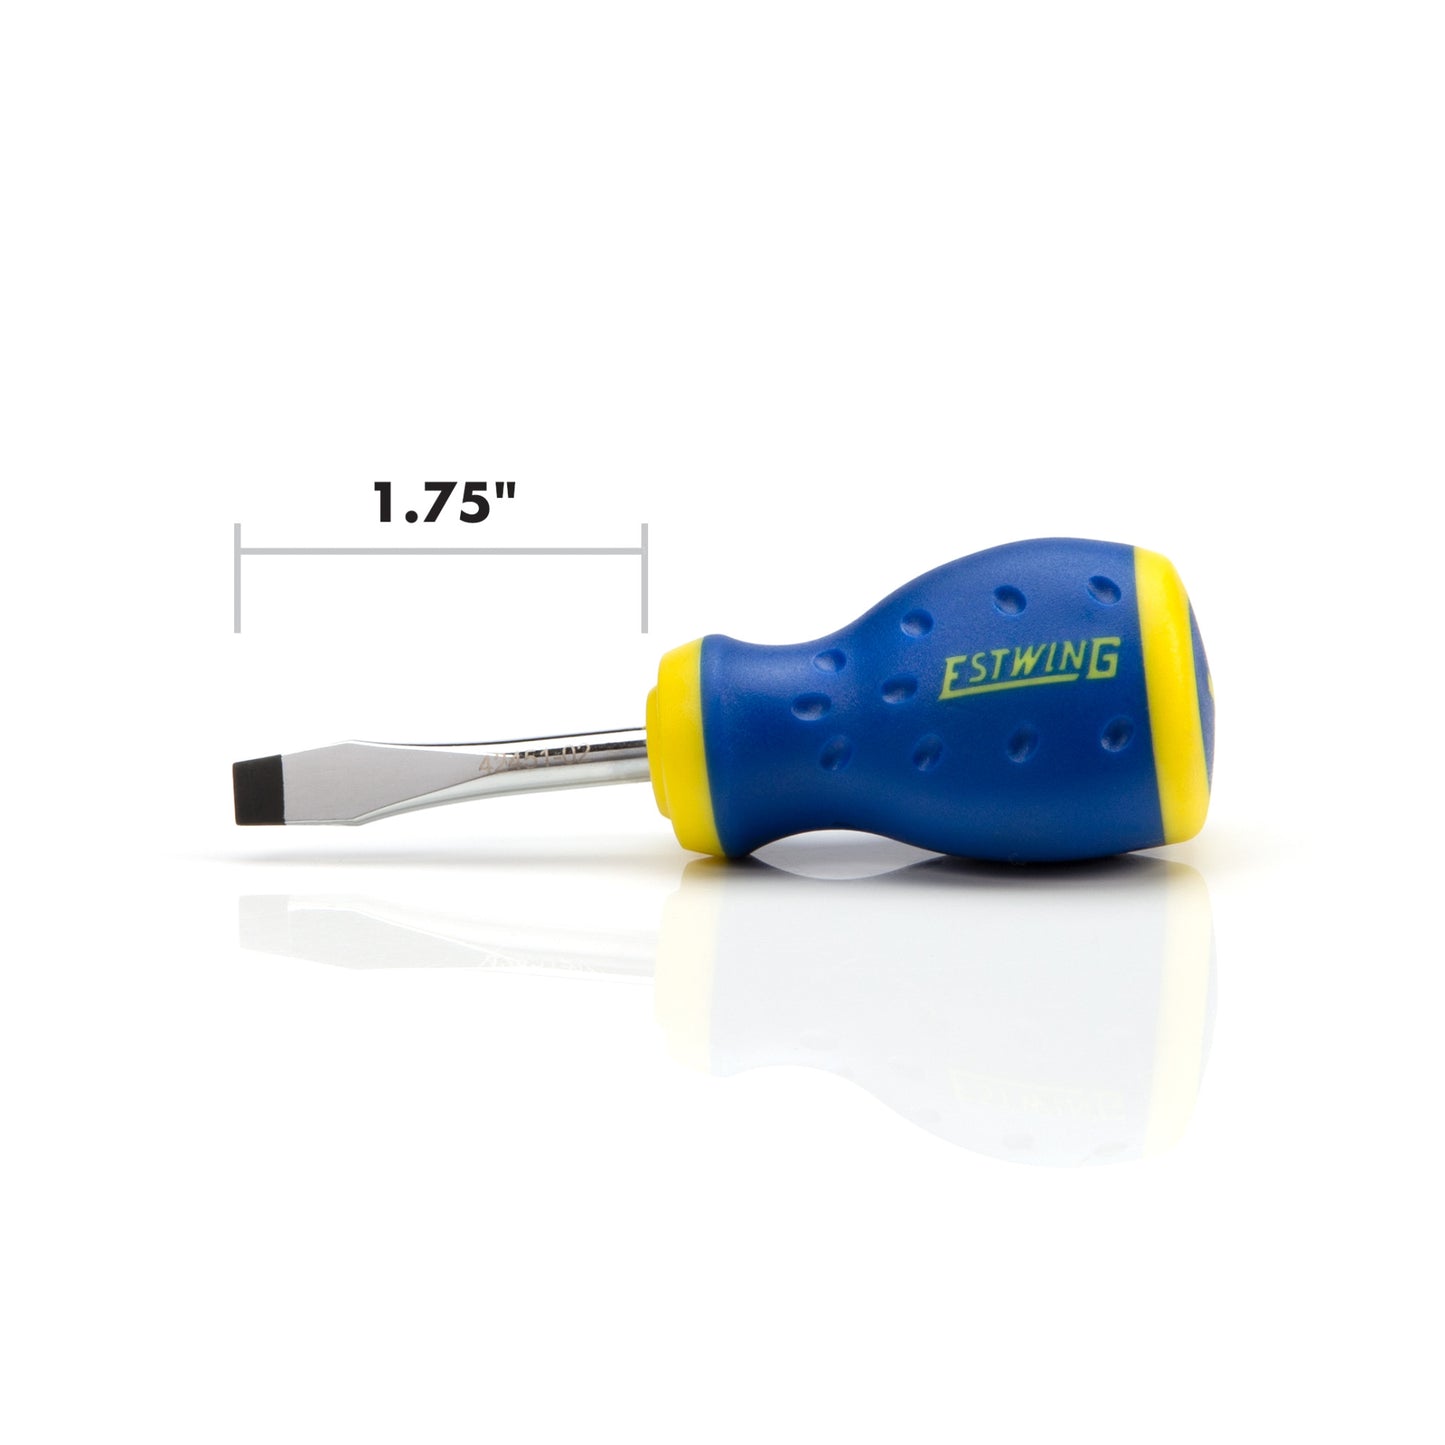 1/4-Inch x 1-3/4-Inch Magnetic Slotted Tip Stubby Screwdriver with Ergonomic Handle